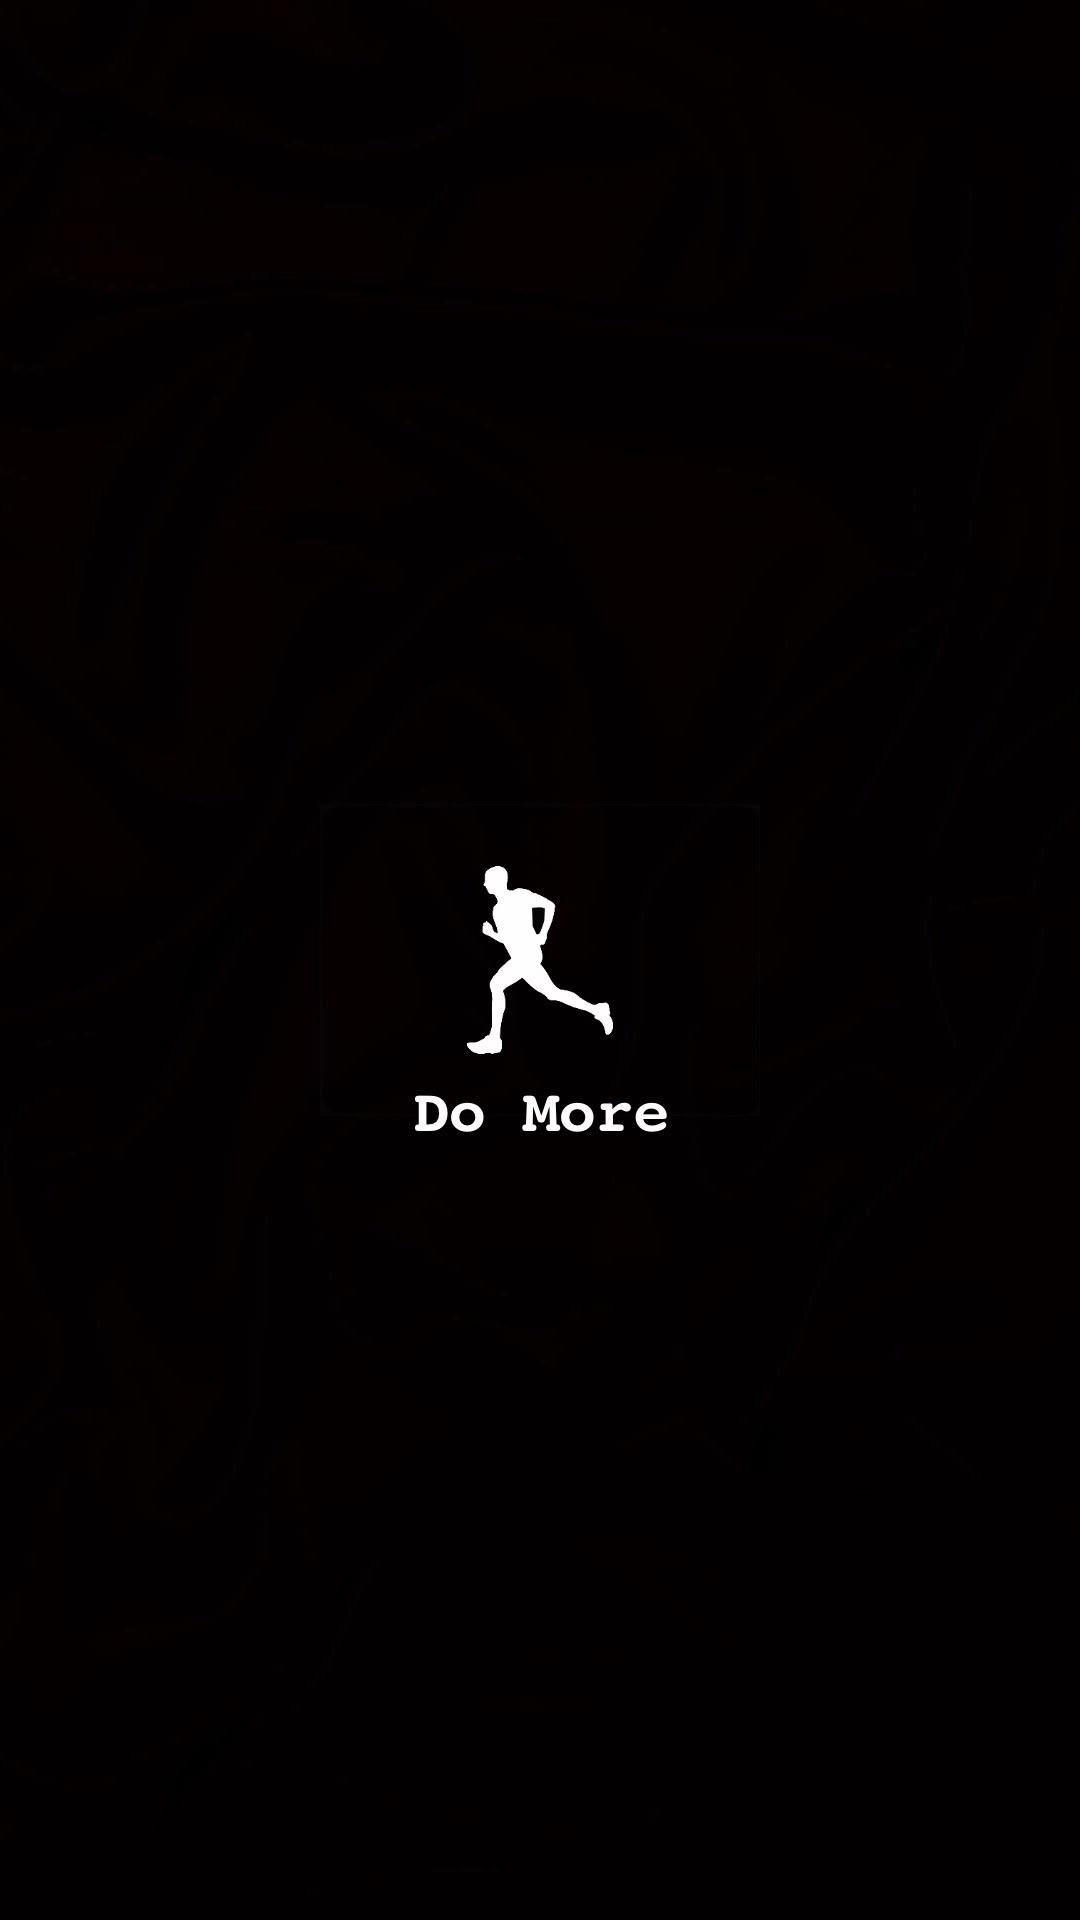 A simplistic Do More wallpaper inspired by Casey's awesome Nike